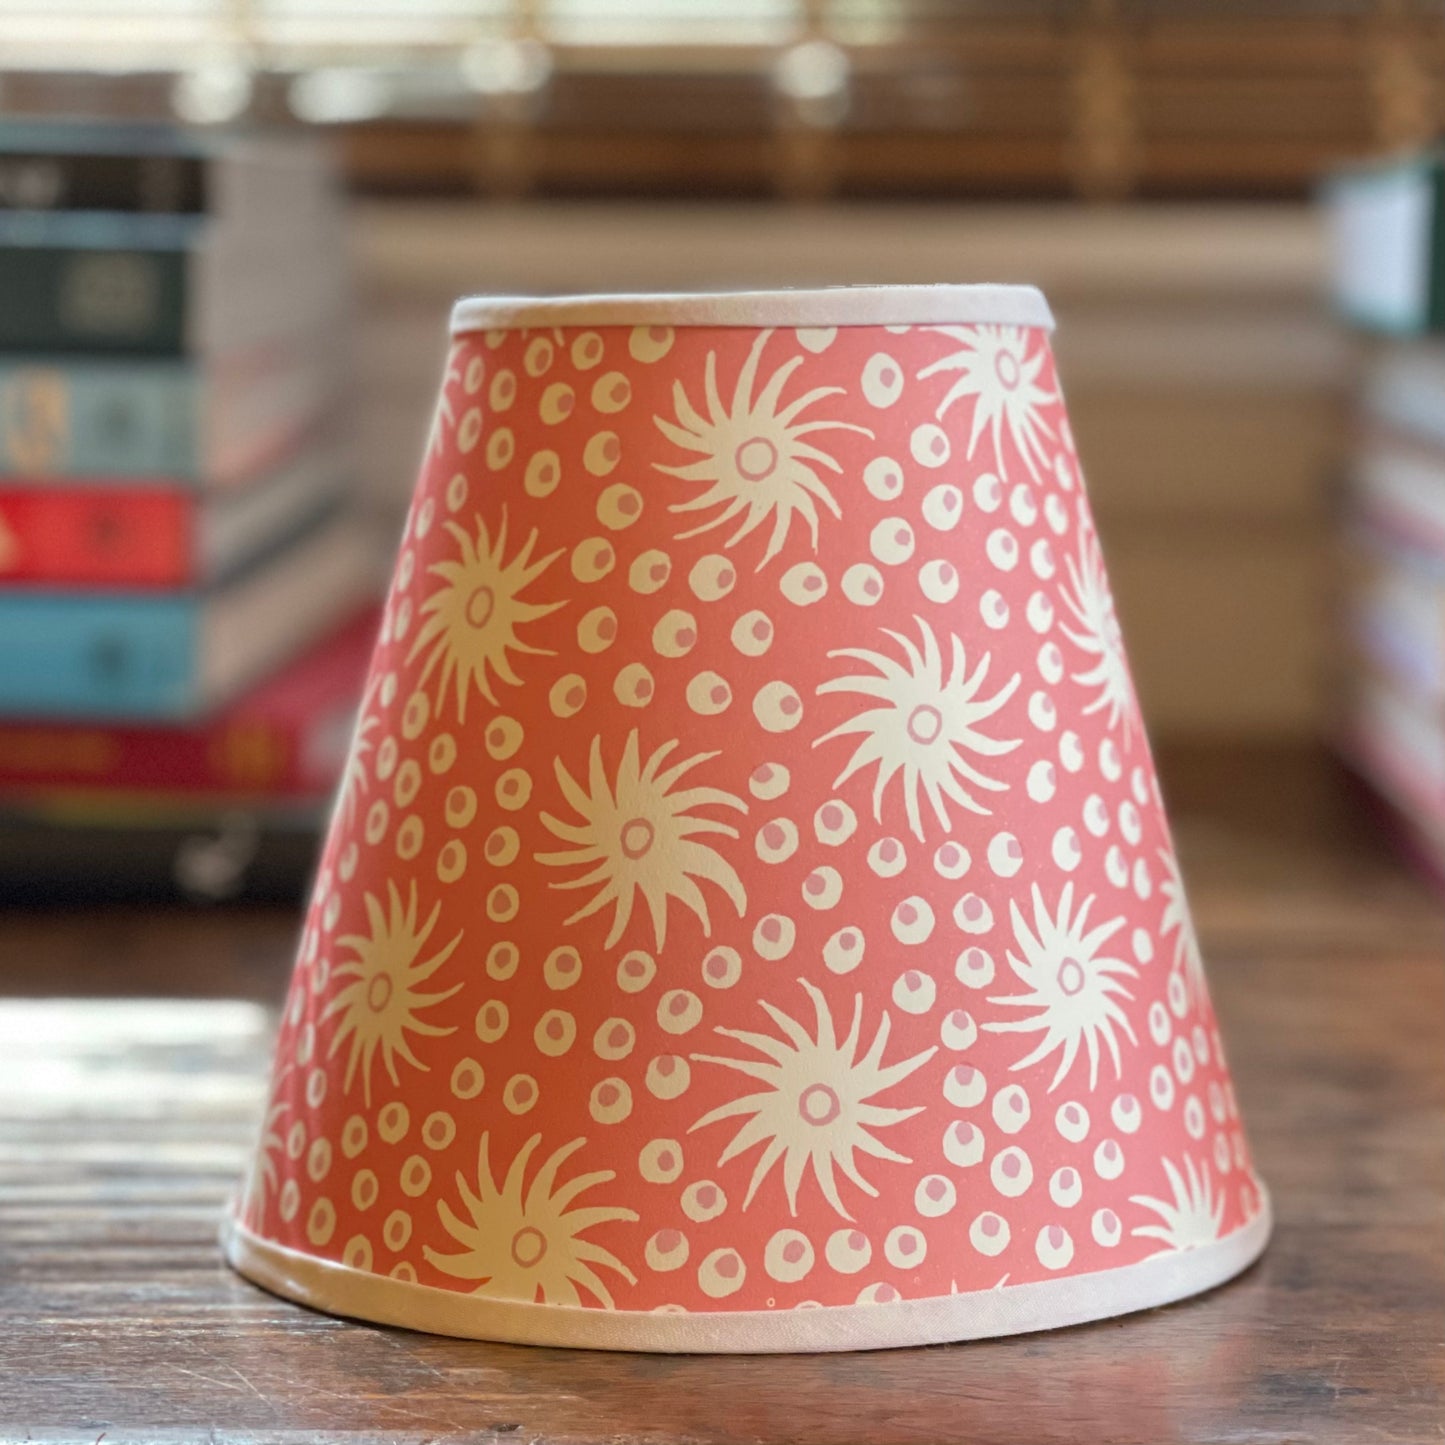 Small Clip-On Lampshade. Patterned Paper from England. "Milky Way" Old Red and Pink. White Trim.